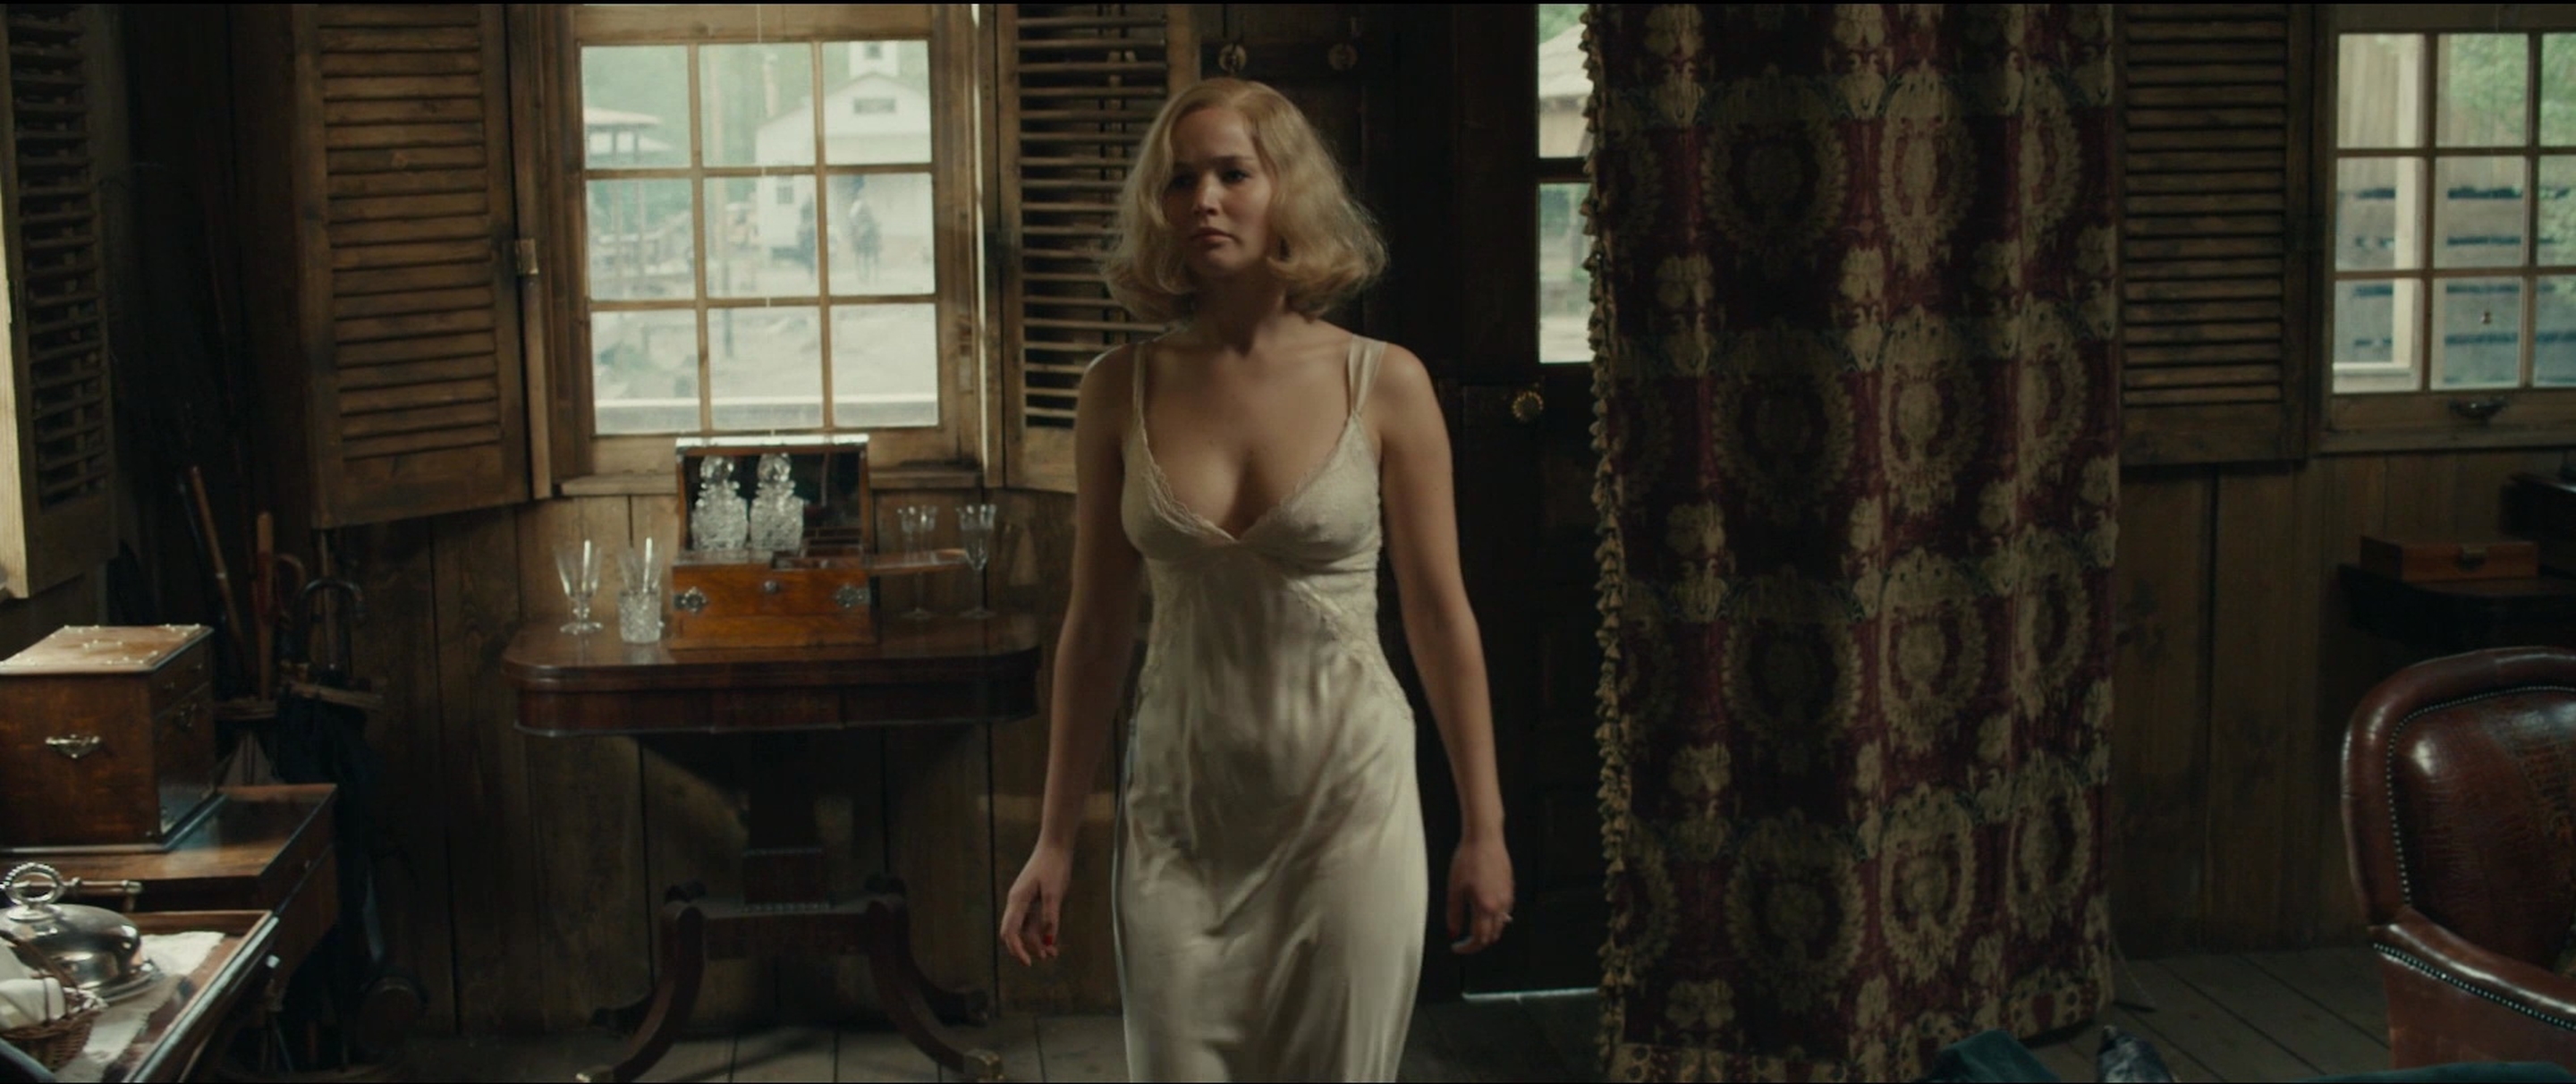 Jennifer lawrence nude in movies